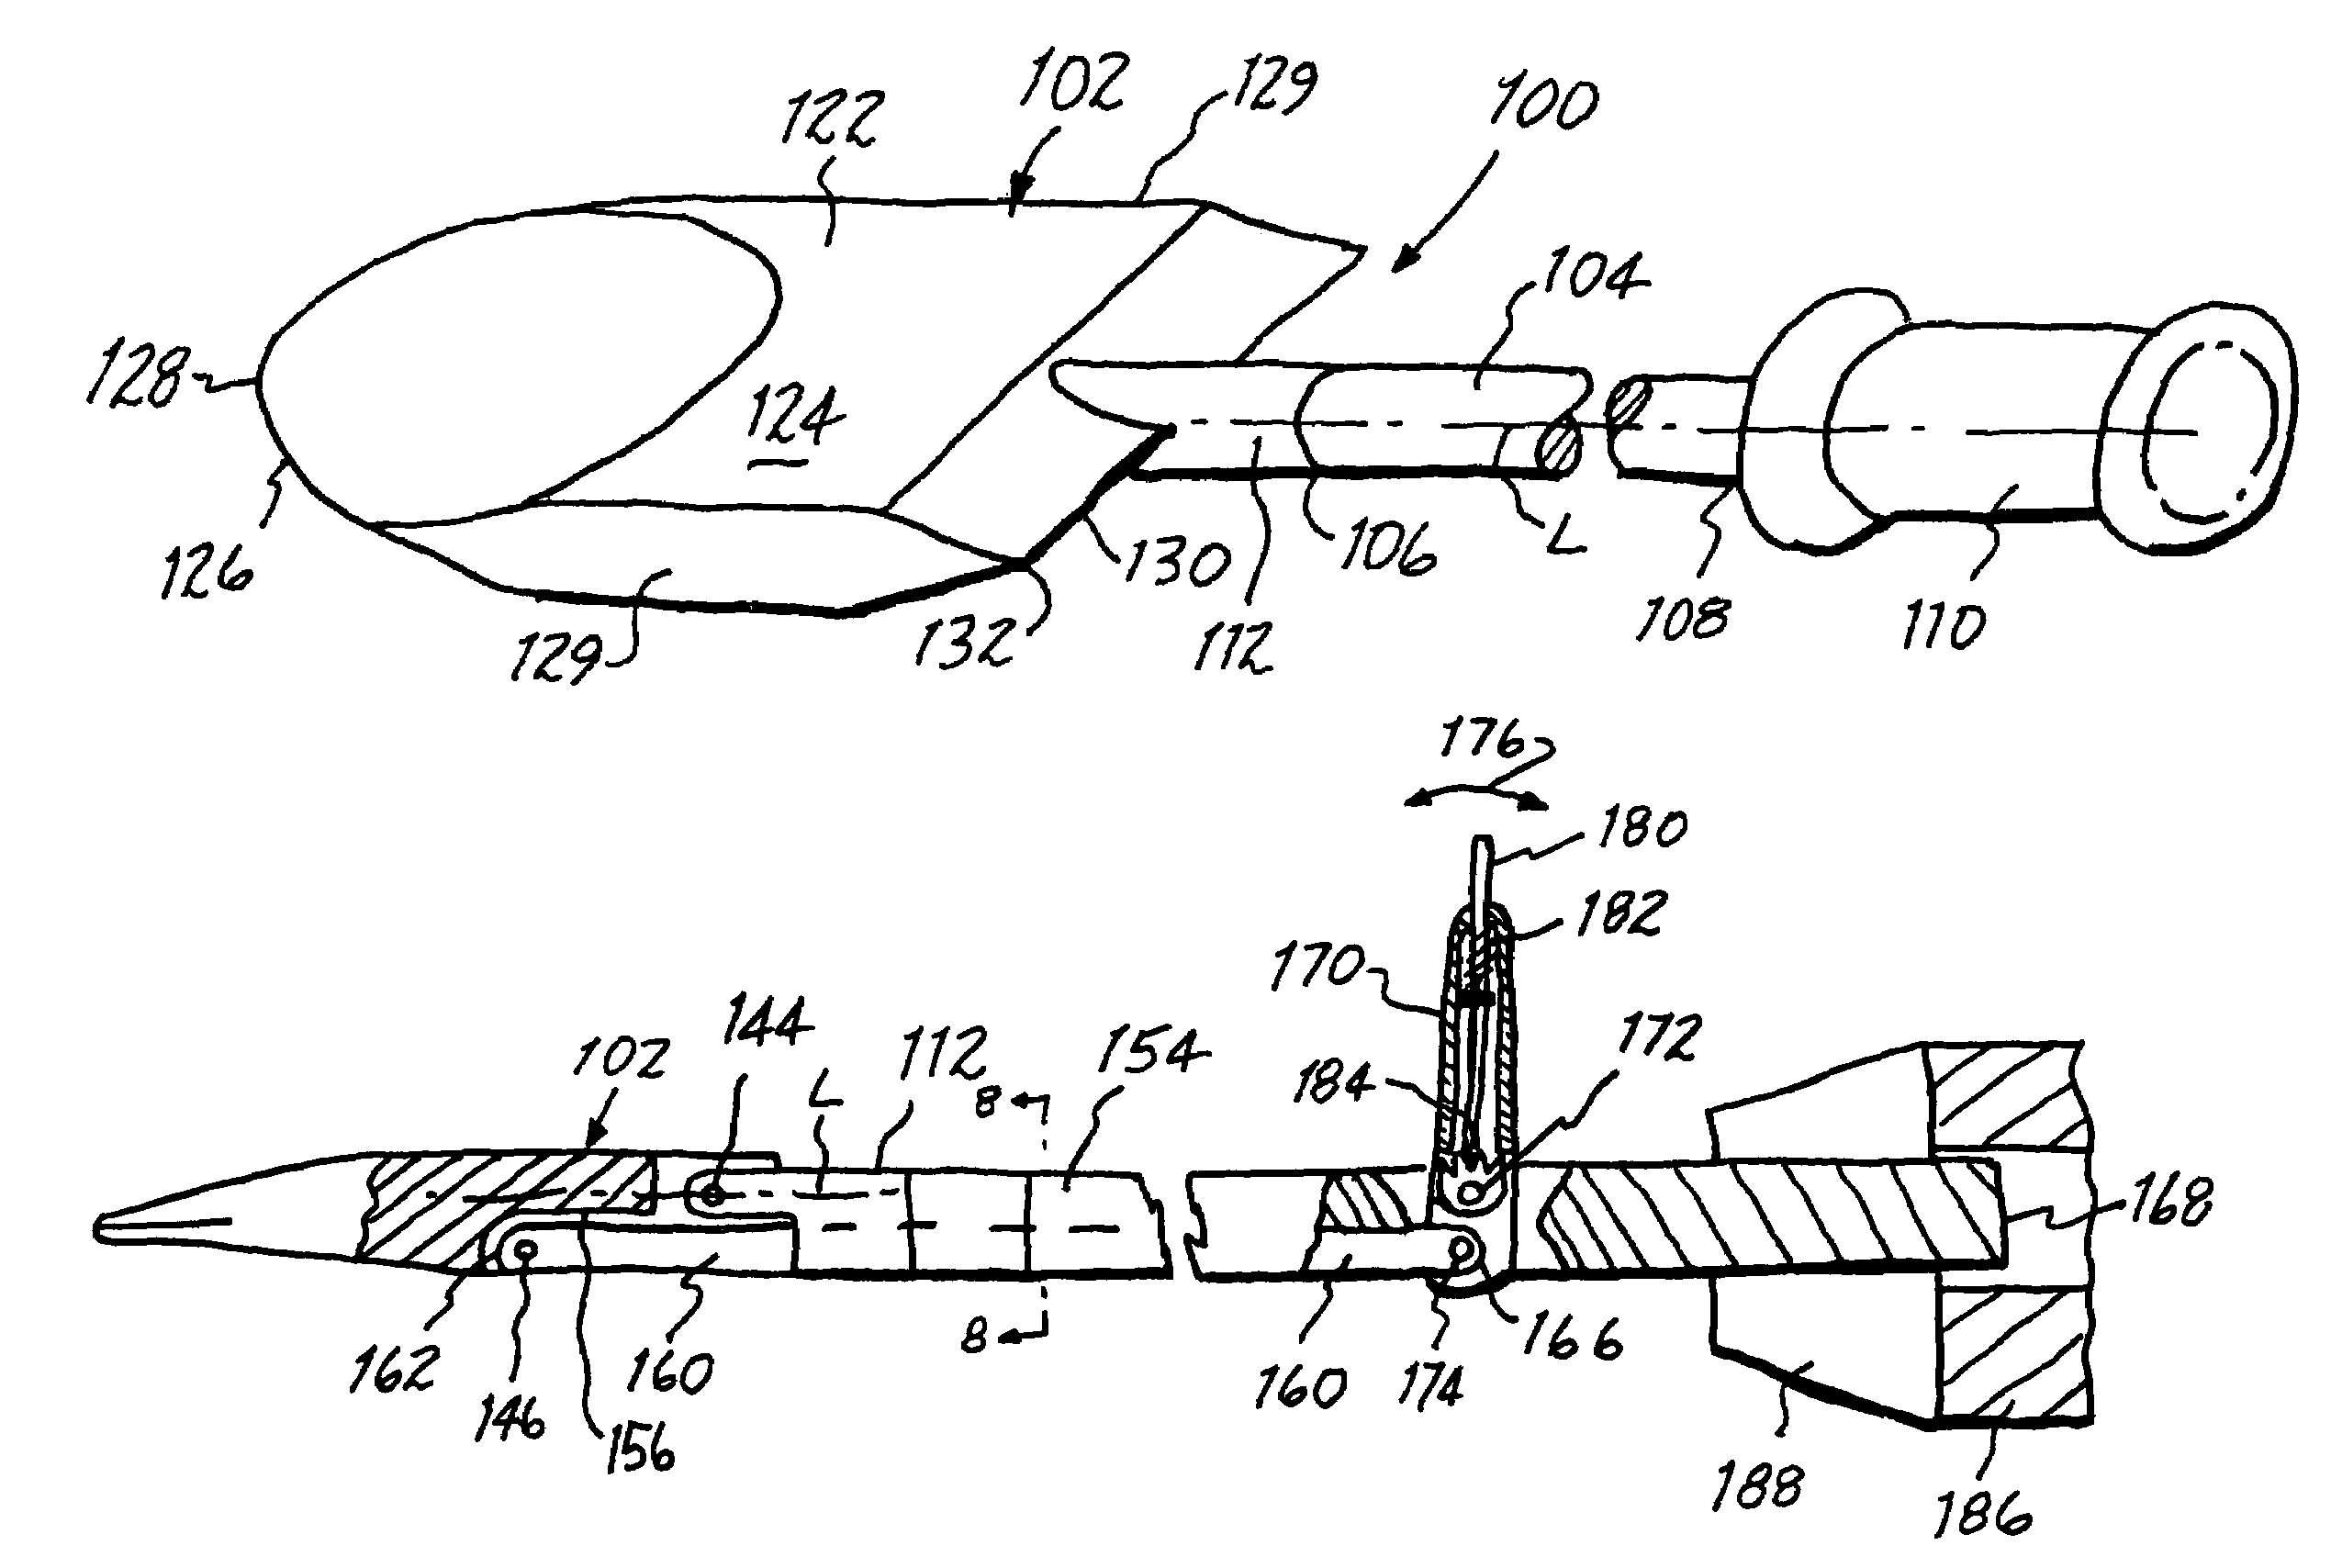 Apparatus and method for the reduction of bone fractures